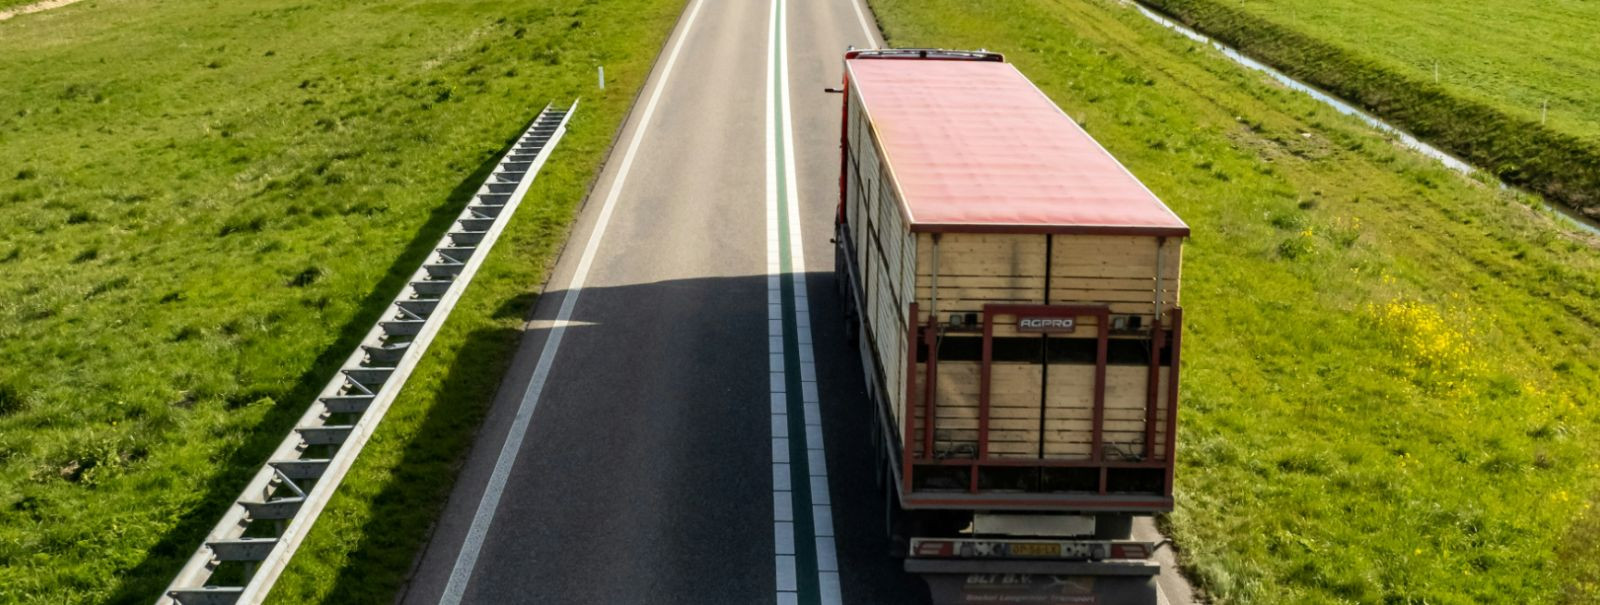 Road freight transport is the process of moving goods by road using motor vehicles. It is a critical component of the logistics chain, enabling businesses to de